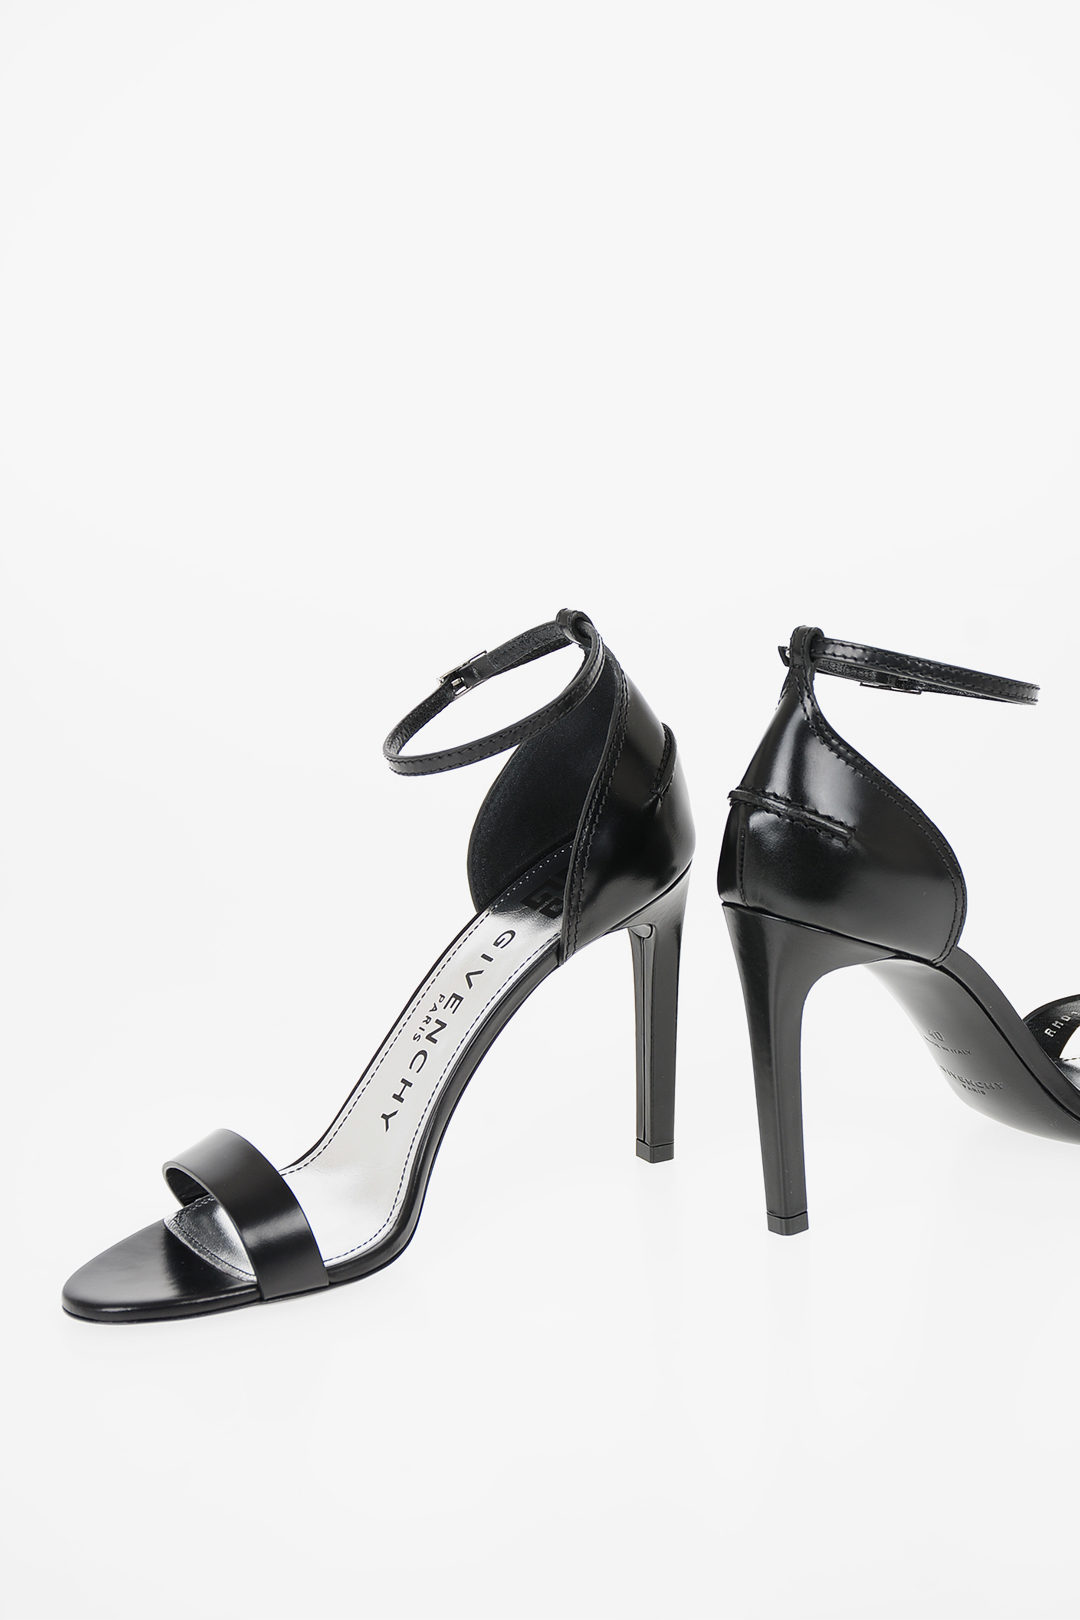 givenchy strap sandals